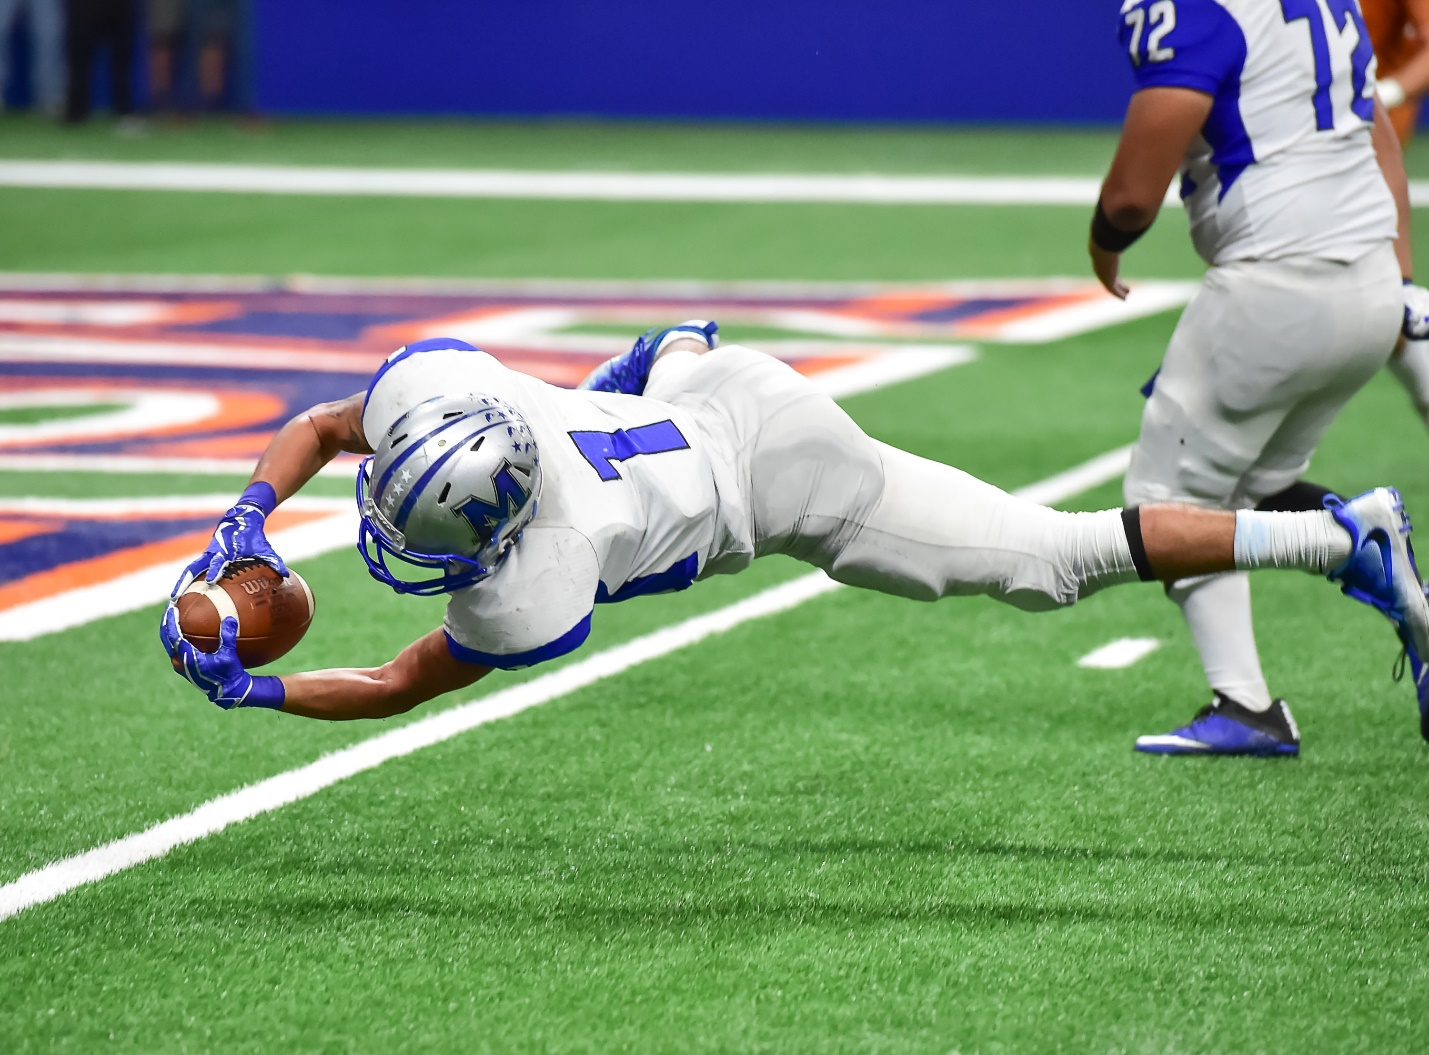 A player falls to the ground with football in his hand